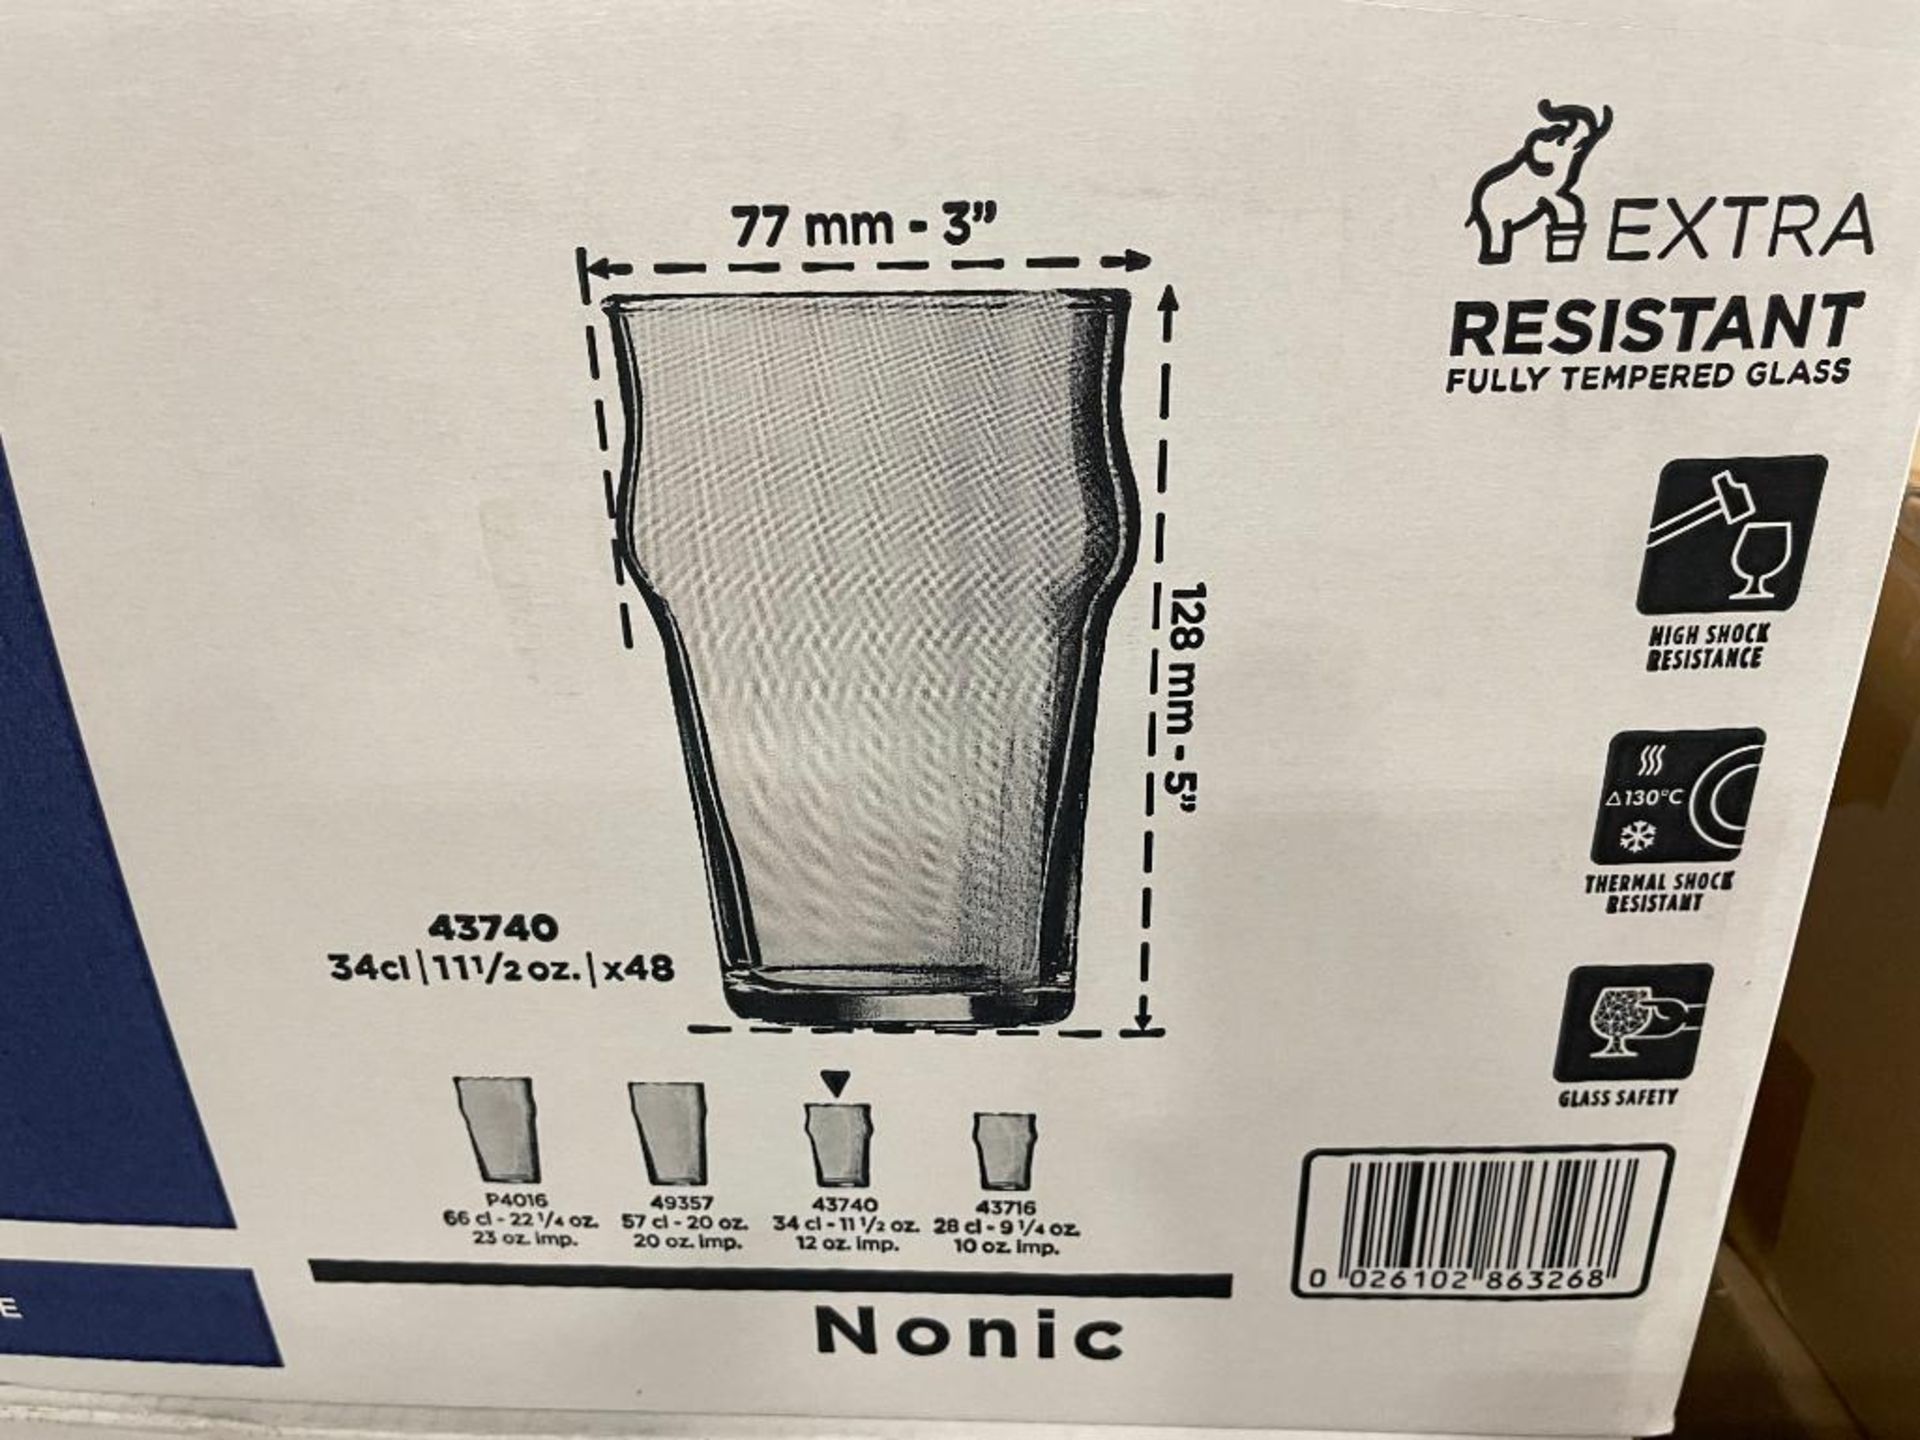 2 CASES OF 12OZ NONIC BEER GLASS, ARCOROC 43740 - 24 PER CASE - Image 9 of 14